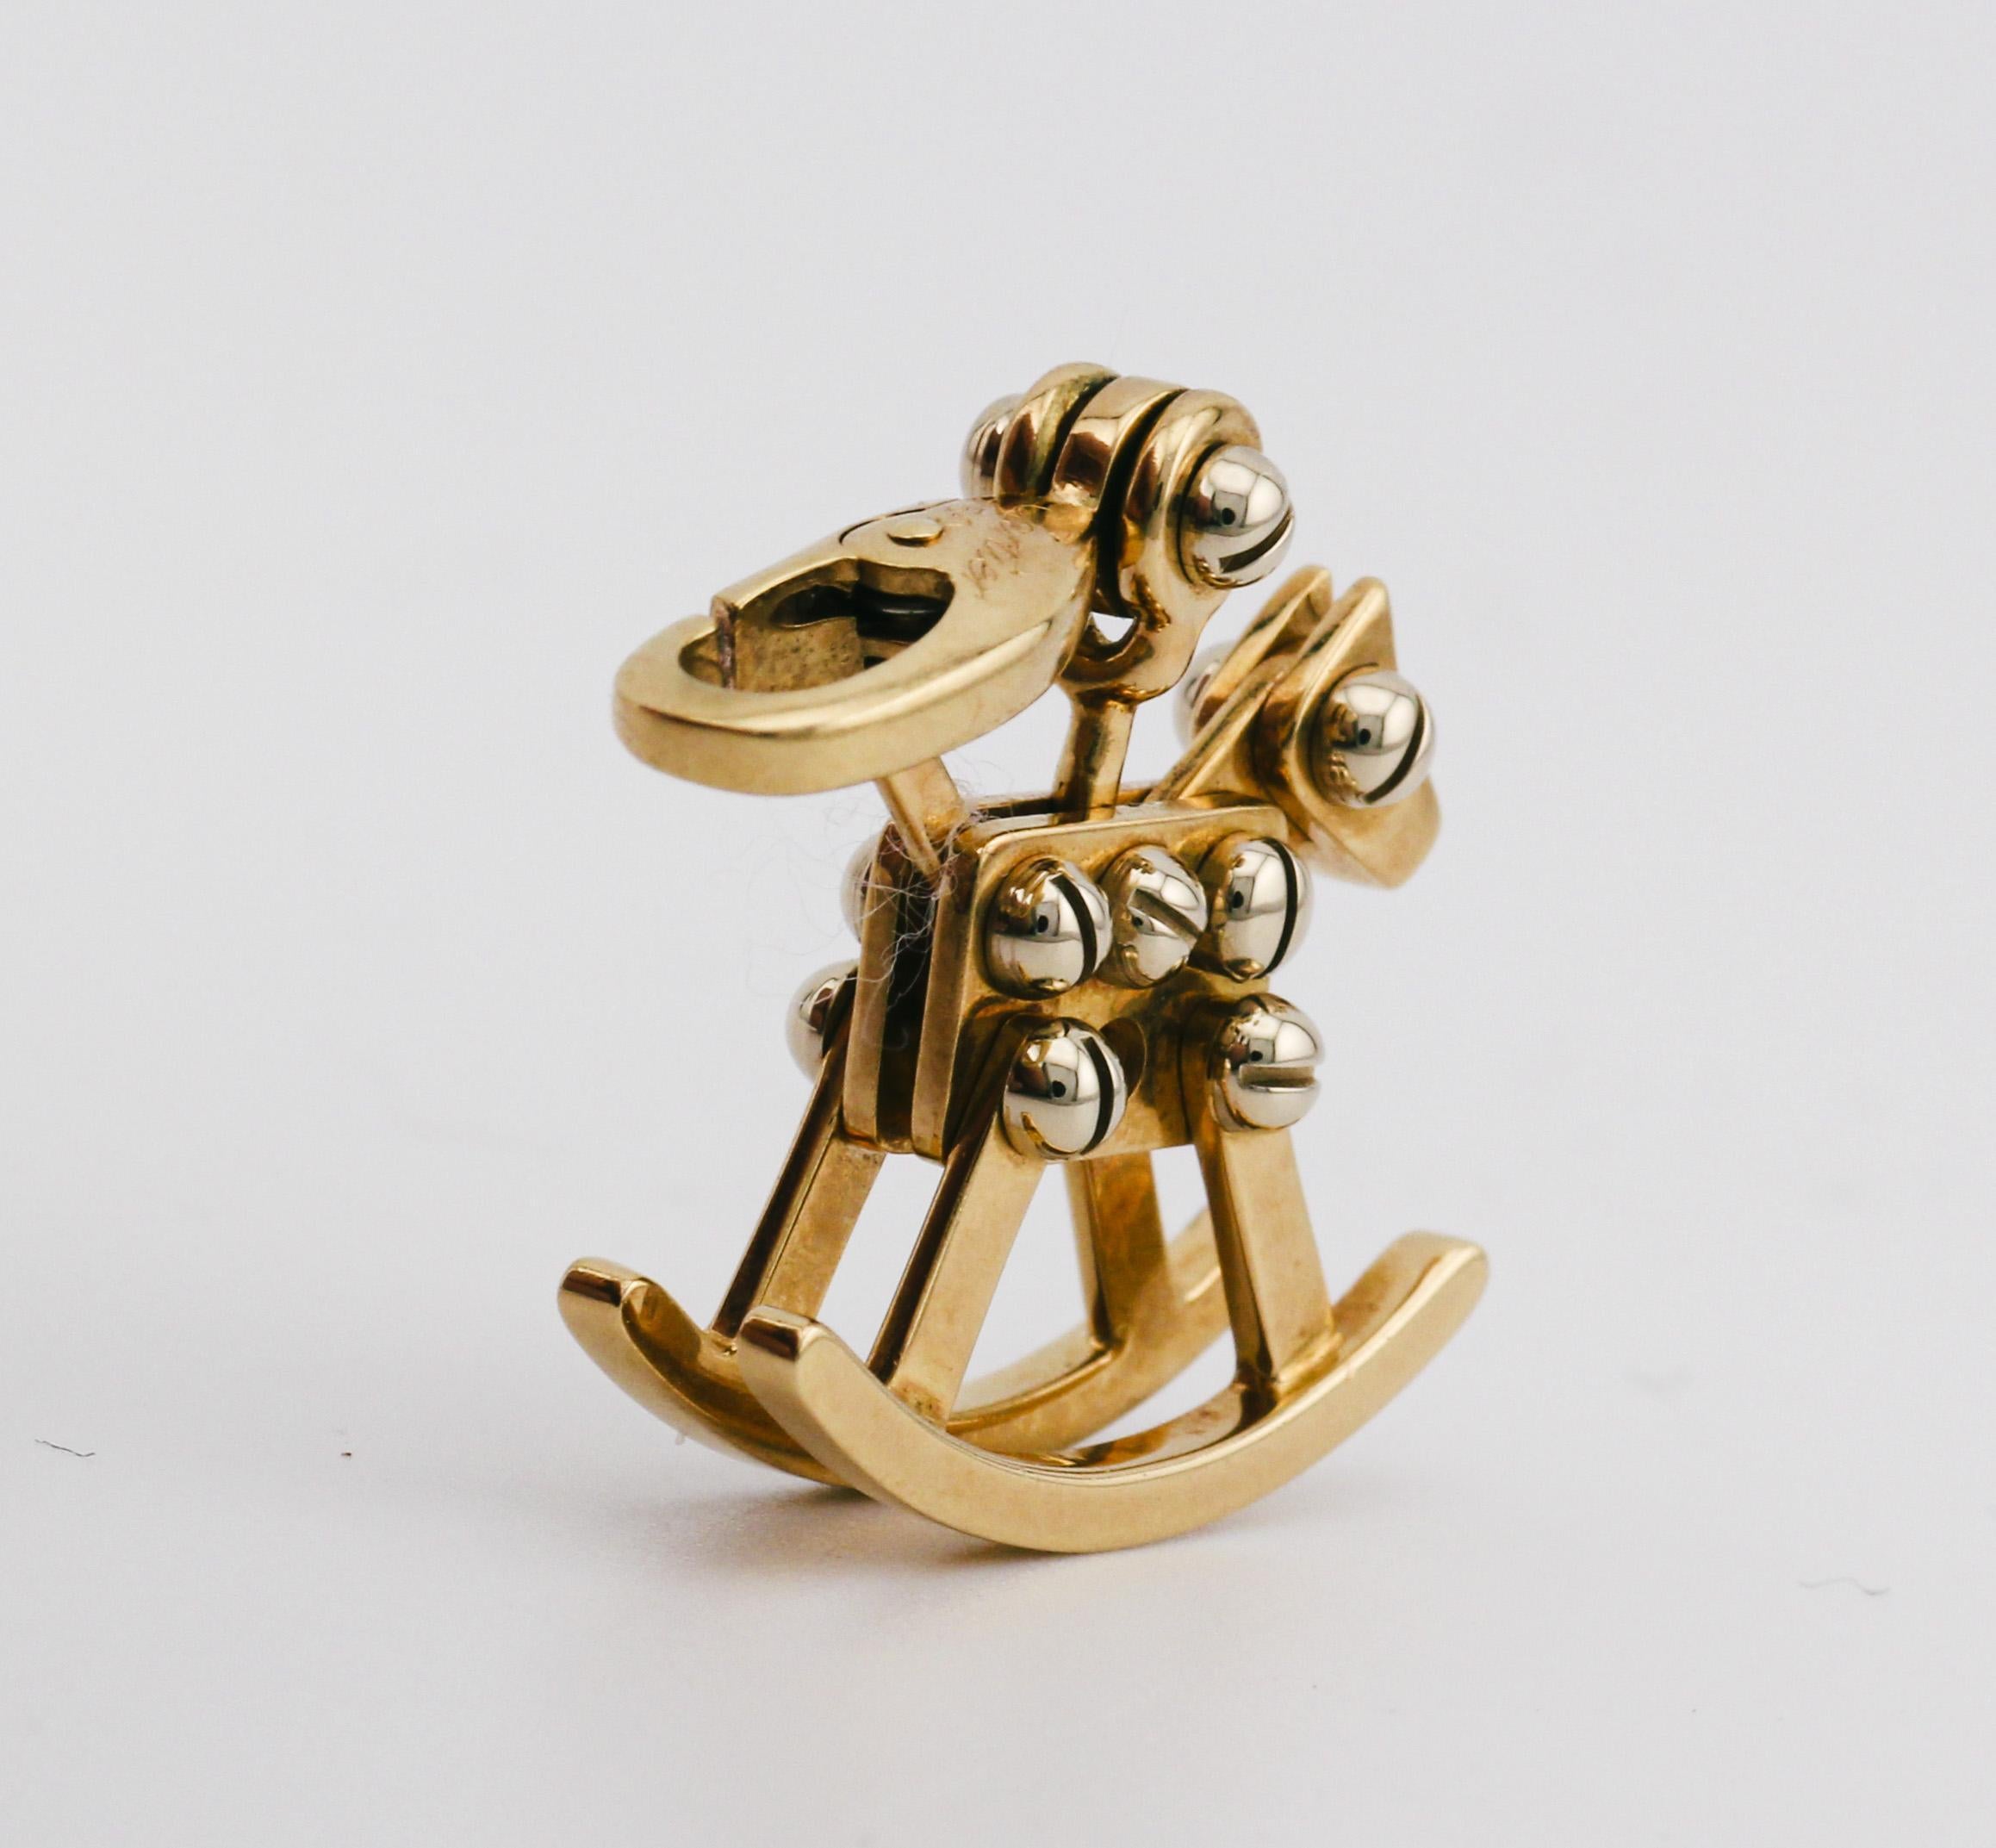 Introducing the Cartier 18K White & Yellow Gold Rocking Horse Charm Pendant—a whimsical and enchanting piece that captures the spirit of childhood wonder and artistic elegance. This delightful pendant is a testament to Cartier's legacy of